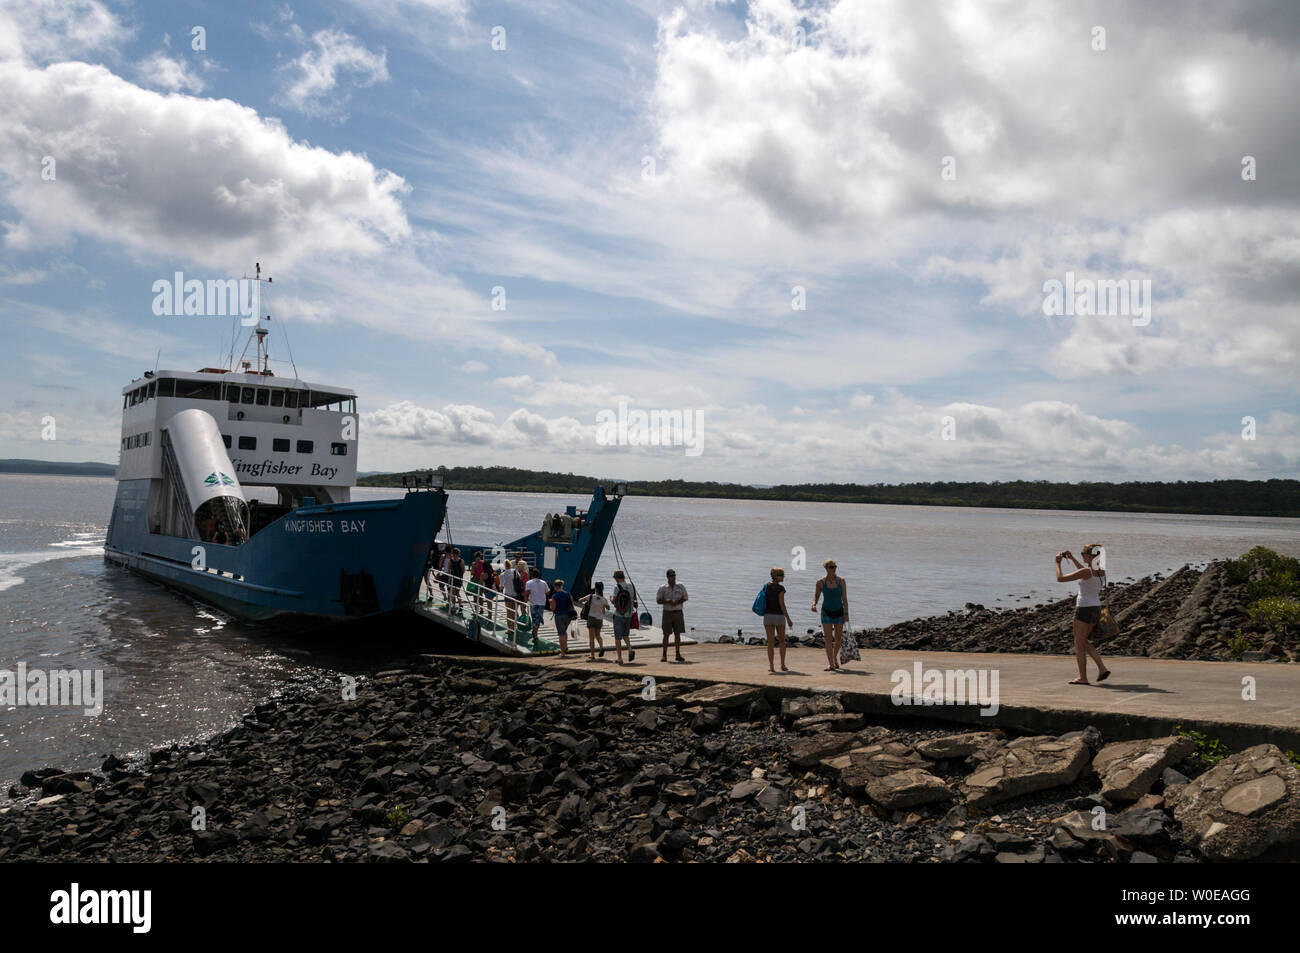 Foot passengers boarding  the Kingfisher Bay car ferry at River Heads south of Hervey Bay for Fraser Island in southern Queensland, Australia. Stock Photo